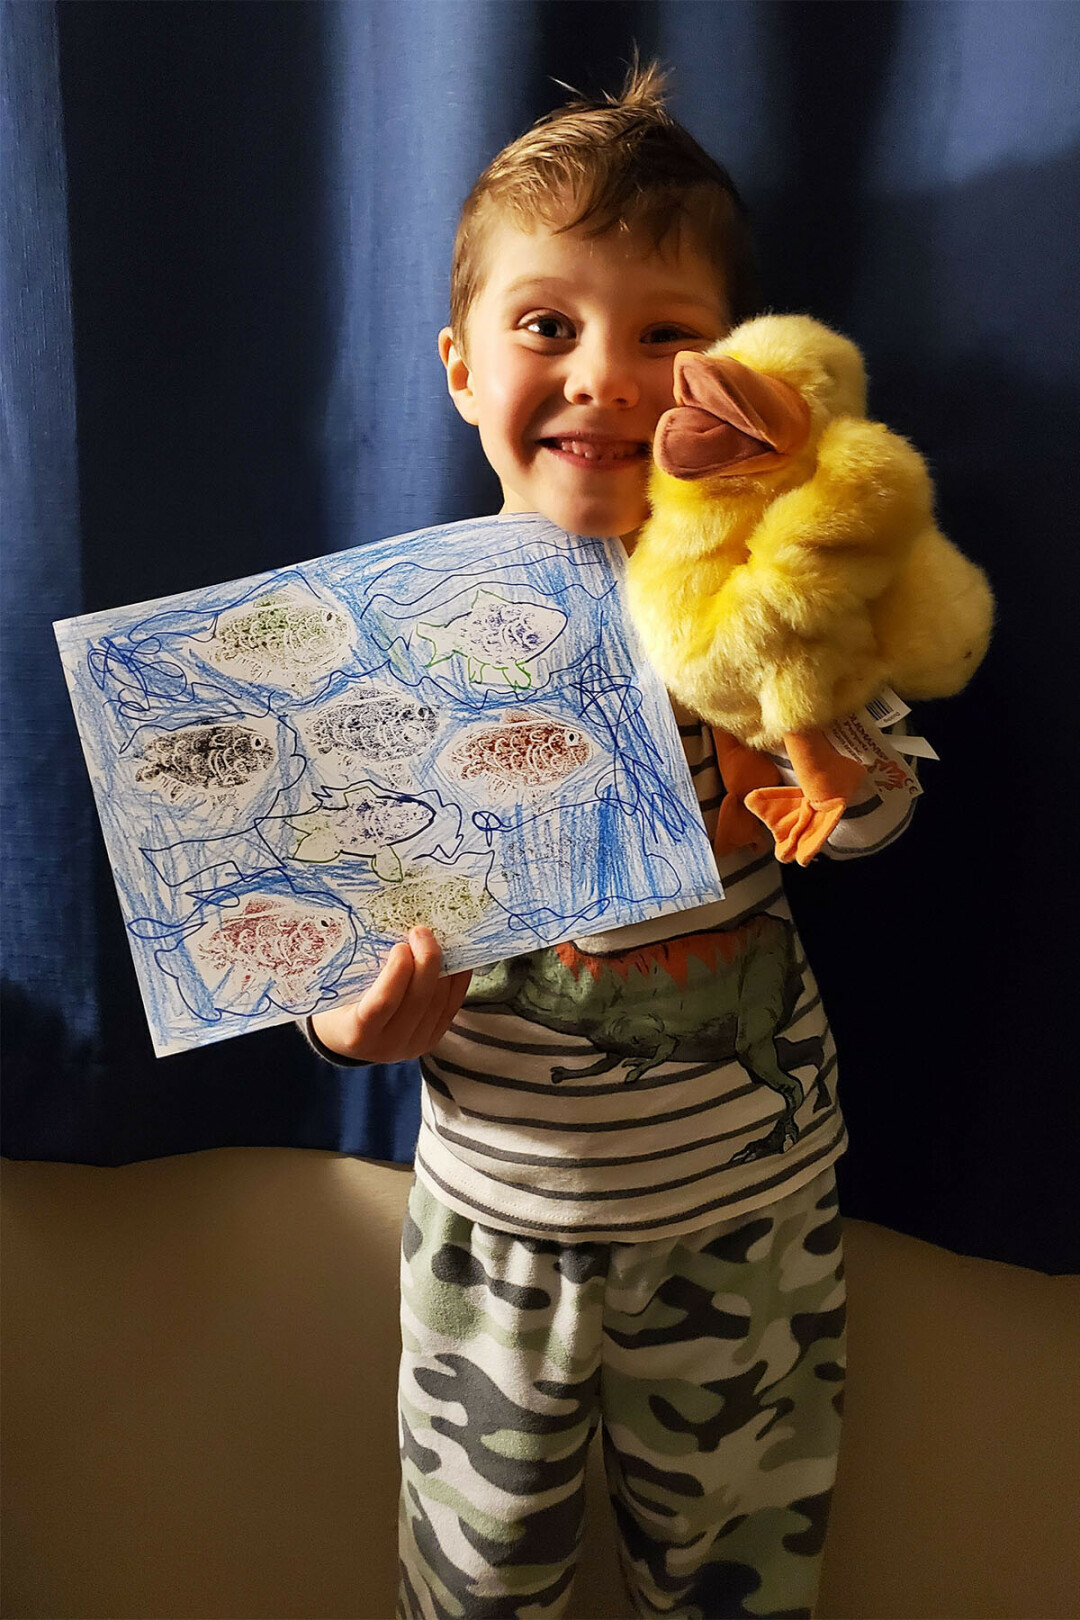 LOOKS JUST DUCKY. Art U 4-H student with their artwork